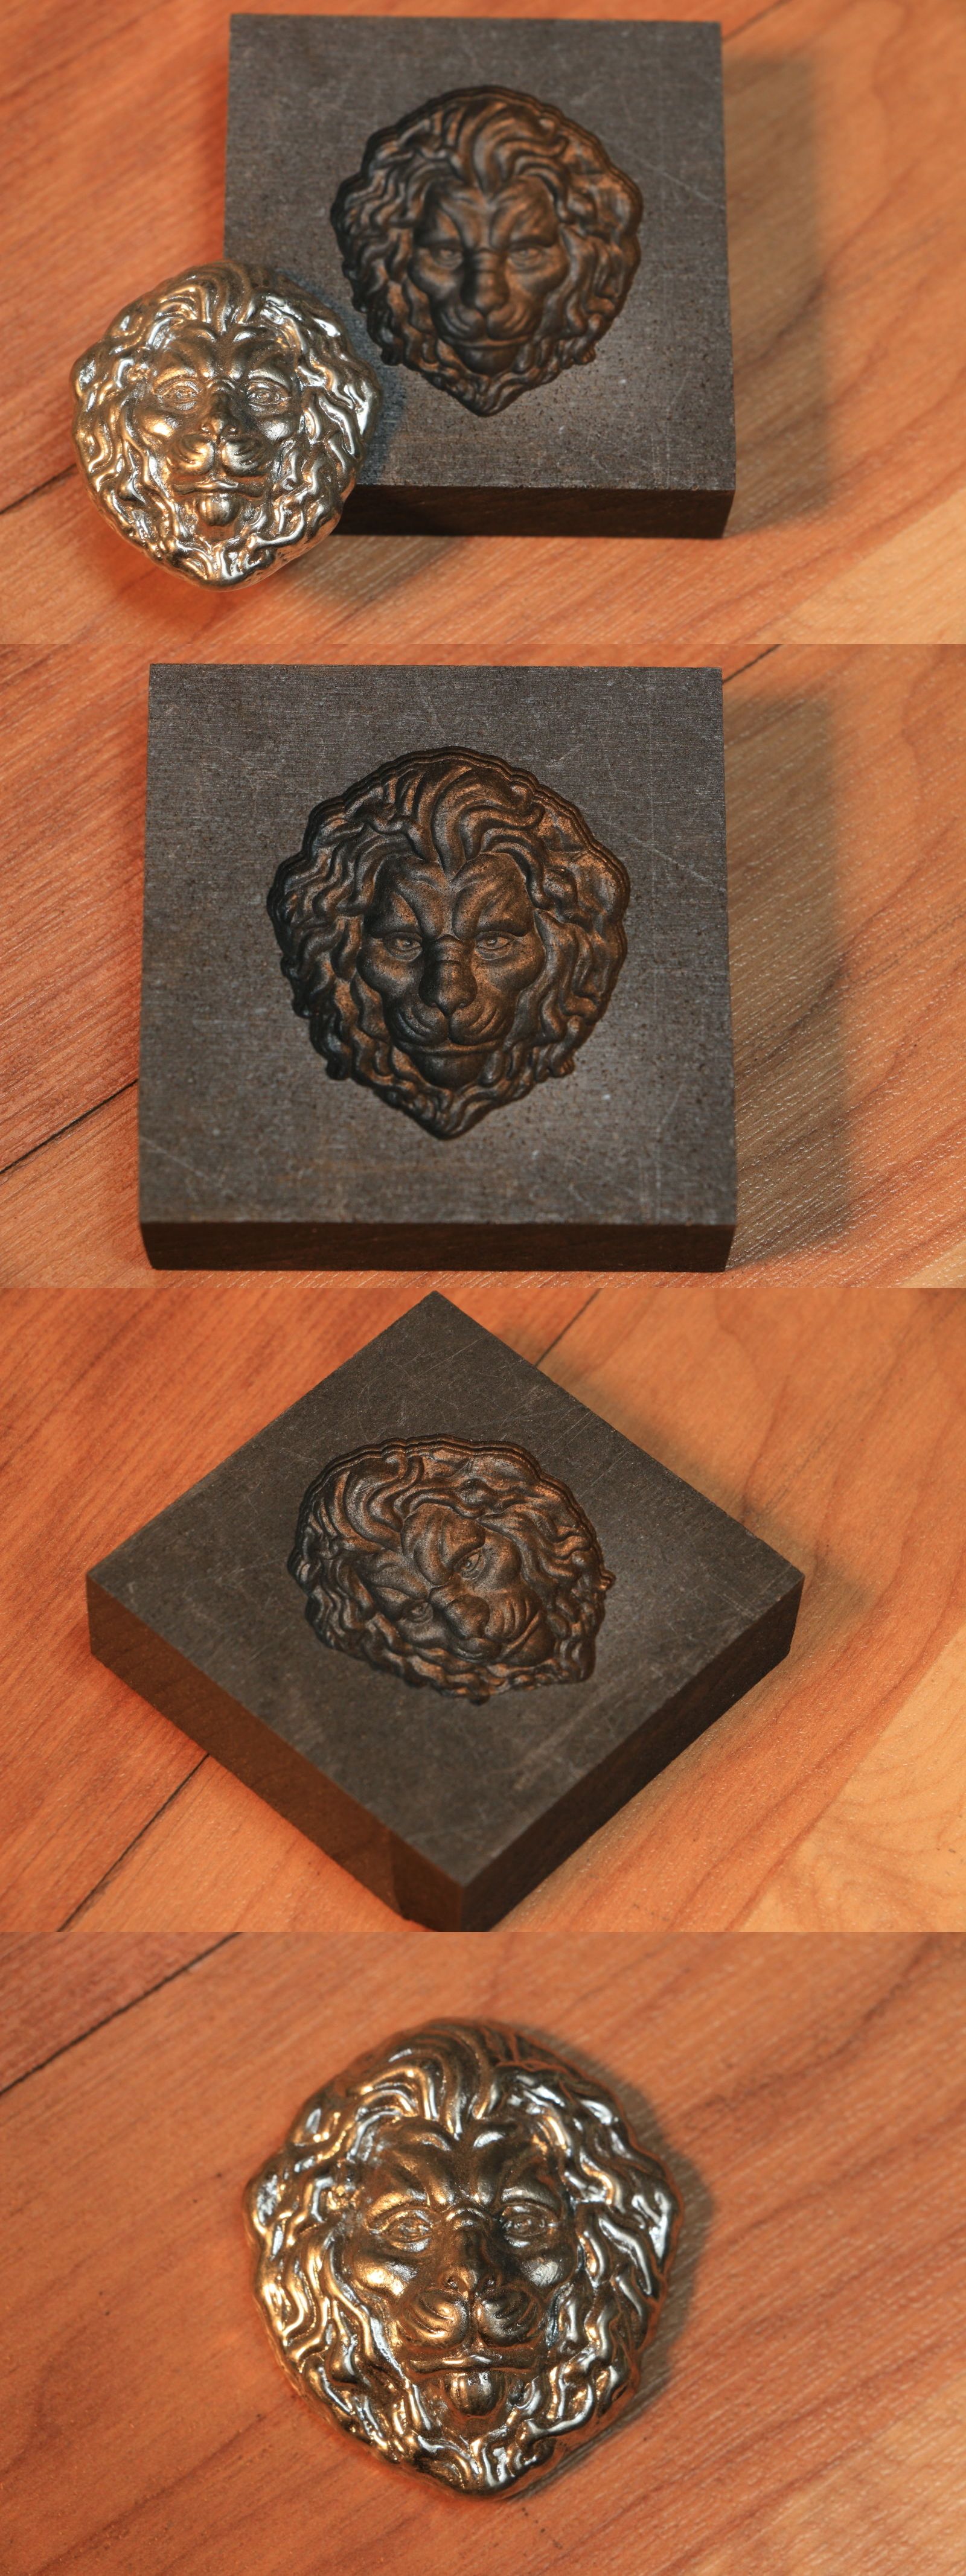 Jewelry Molds 67711: Large Lion Graphite Mold For Casting Silver ...